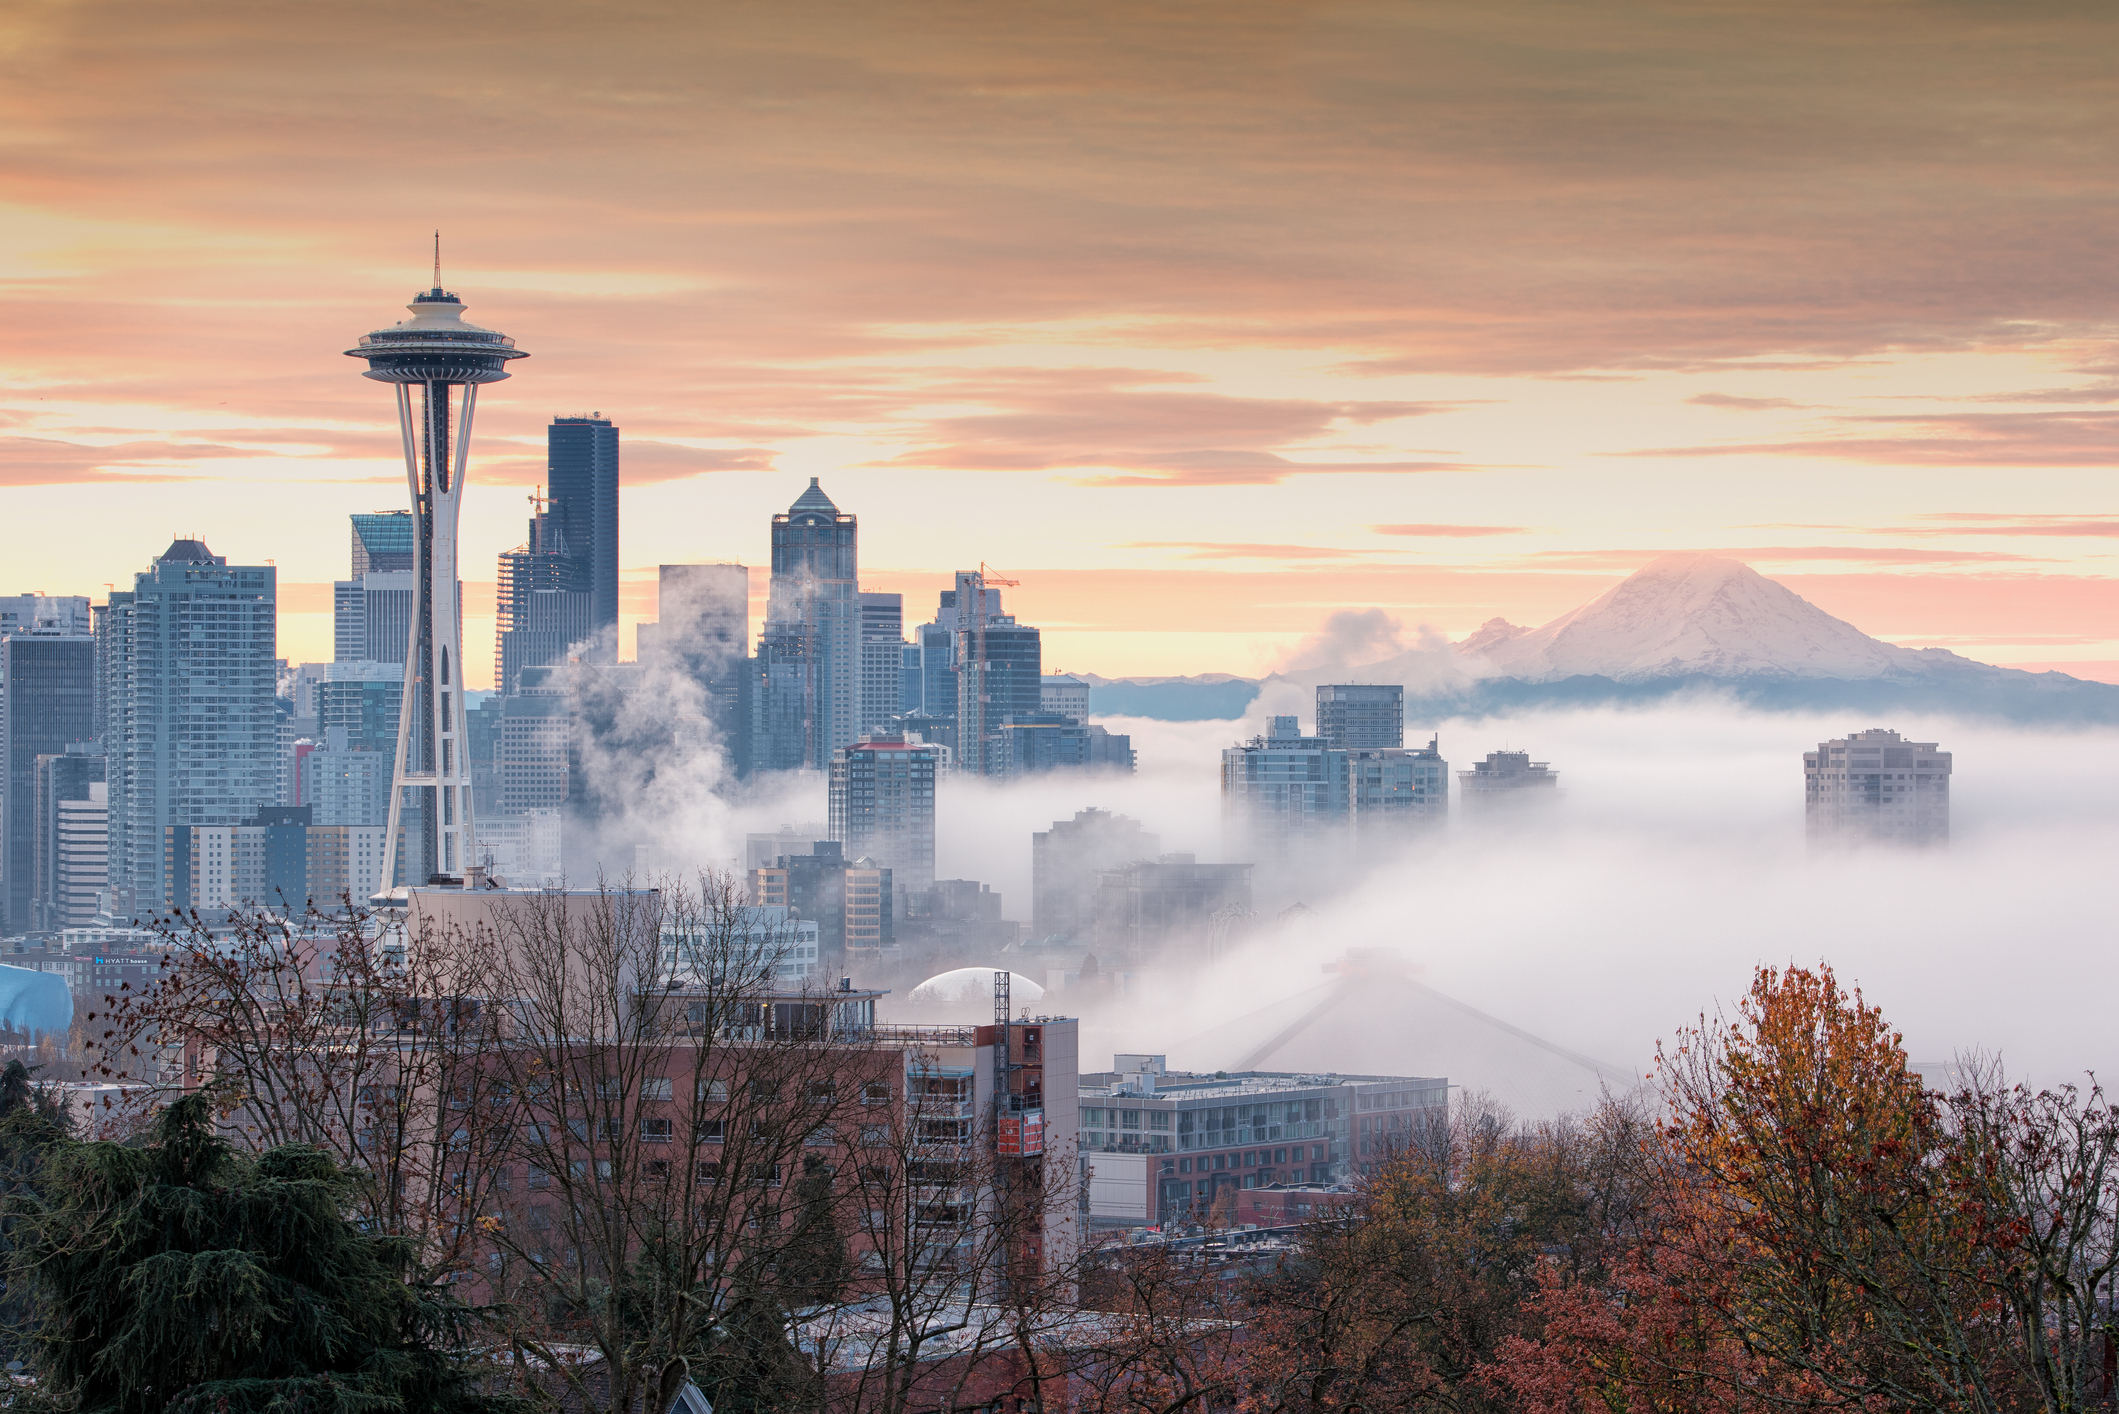 The city of Seattle saw more than 100,000 new residents between 2010 and 2020, according to the most recent Census numbers.